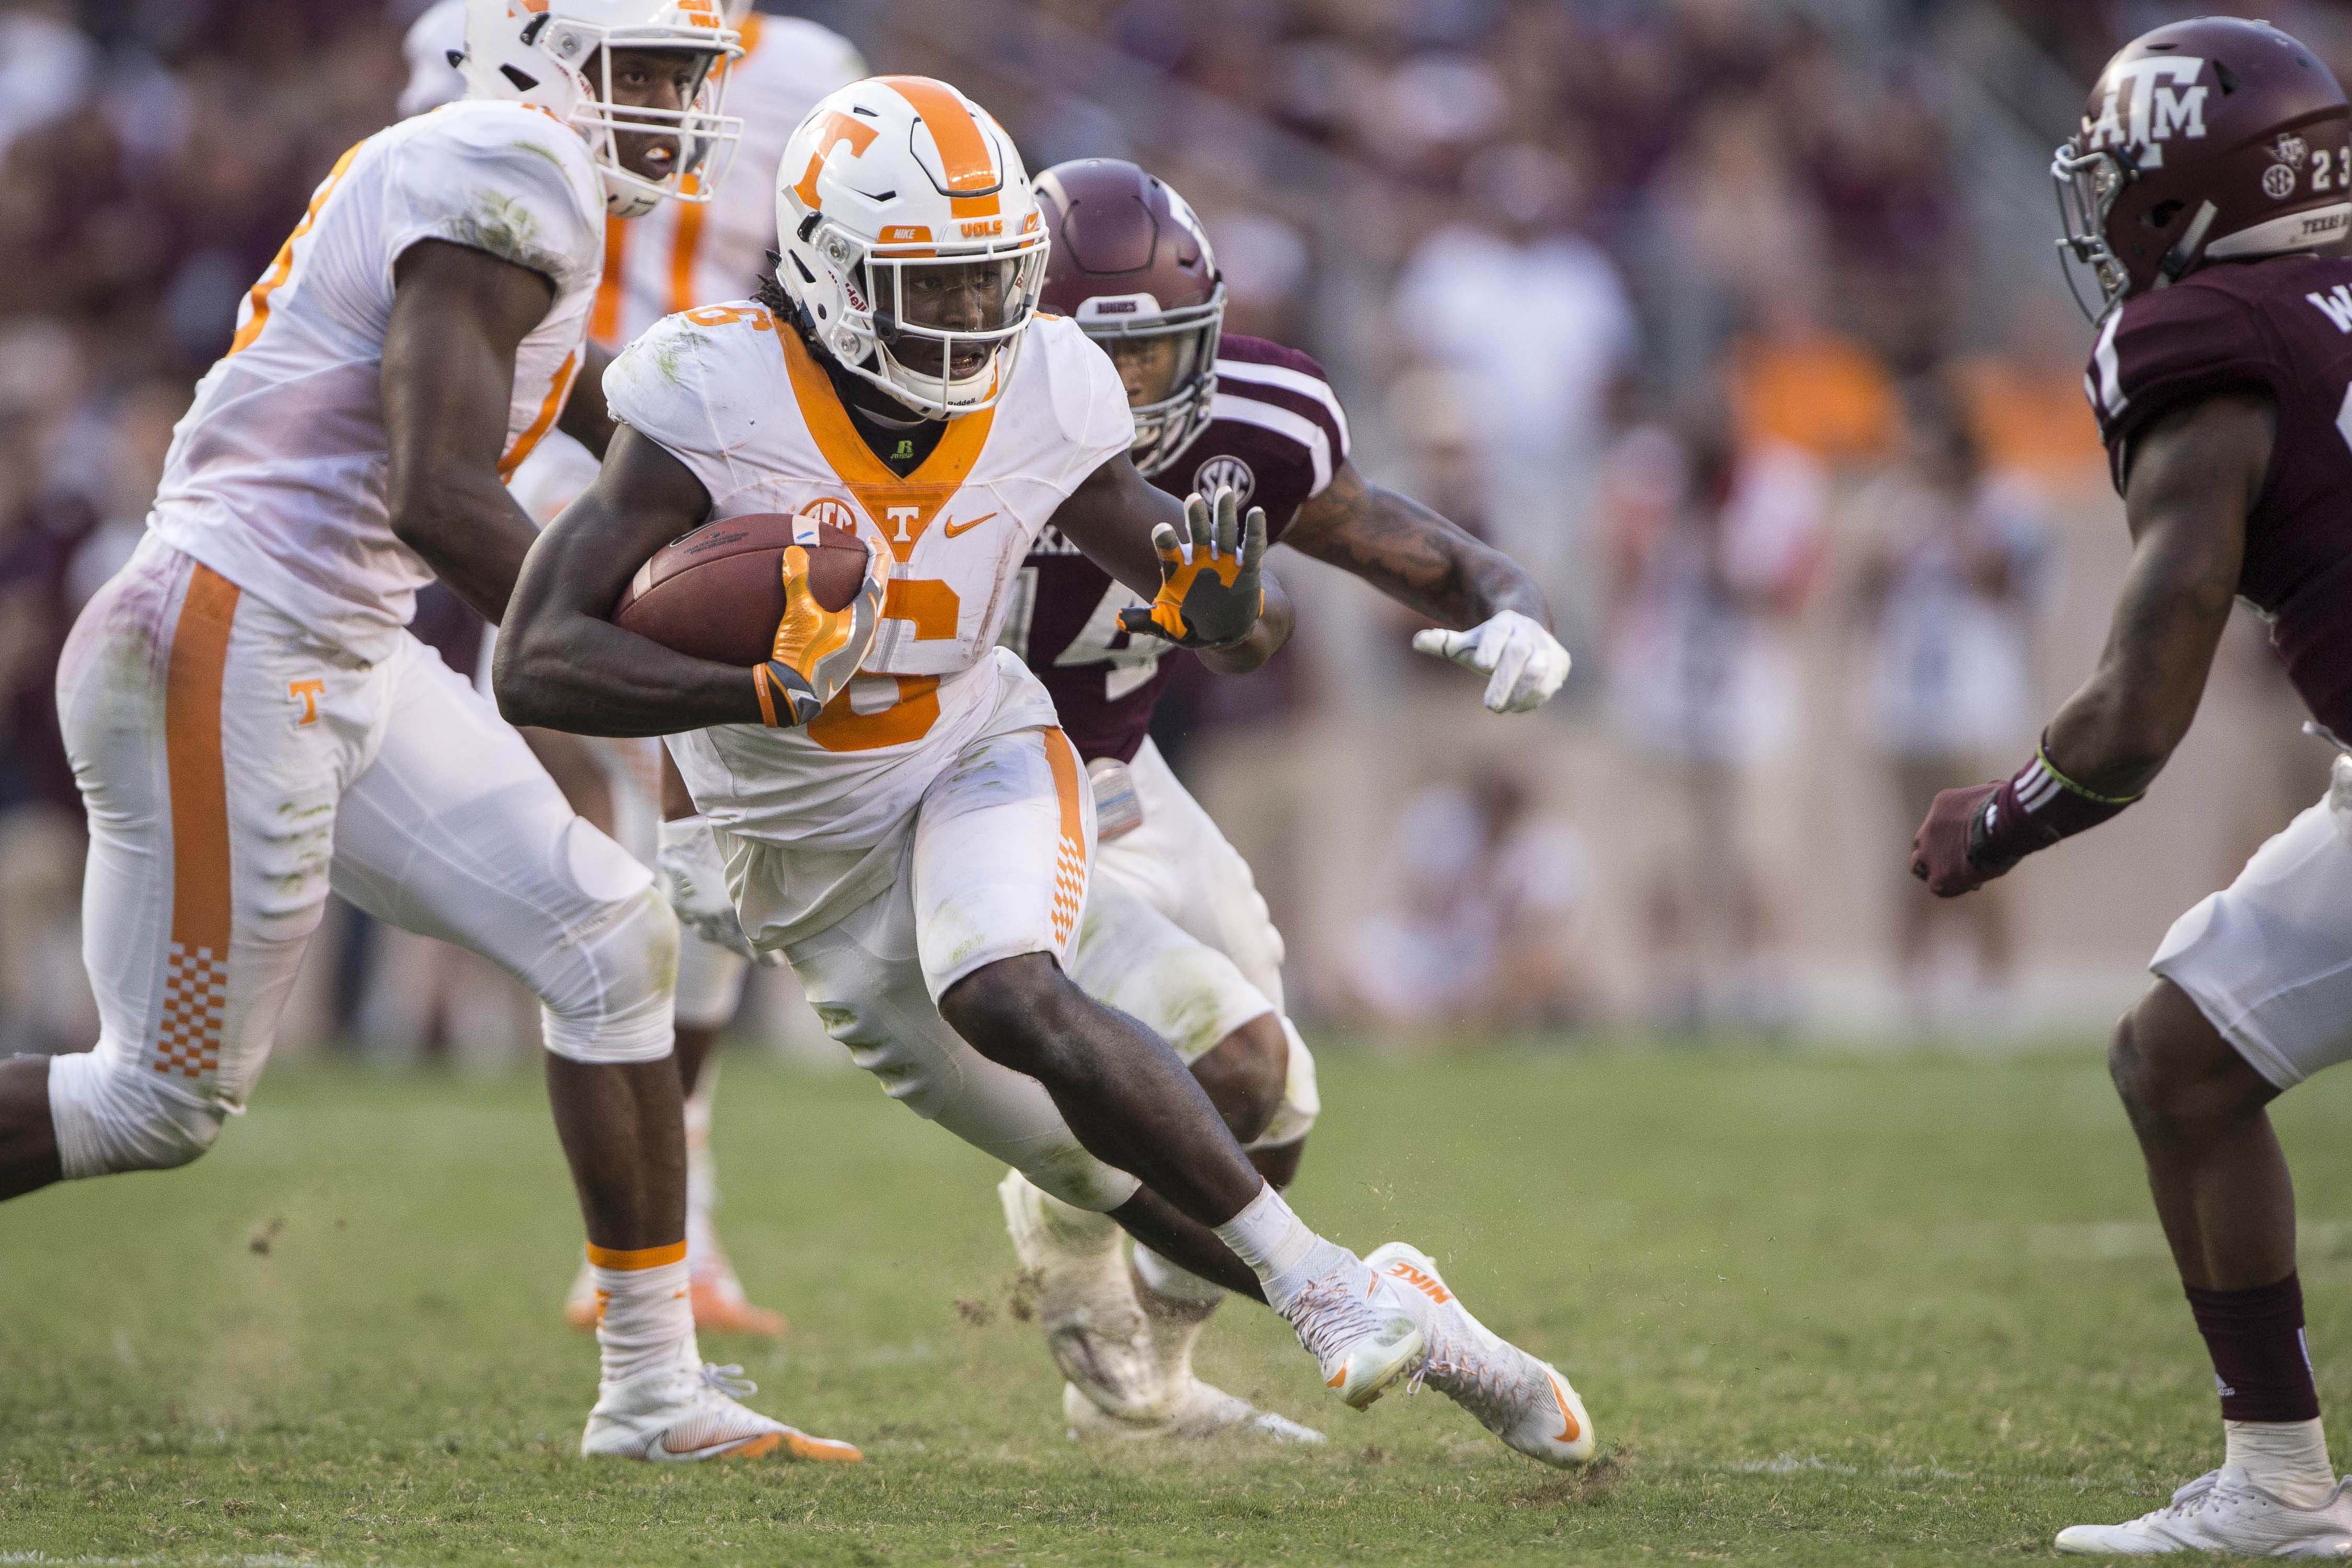 Oct 8, 2016; College Station, TX, USA; Tennessee Volunteers running back Alvin Kamara (6) runs for a first down against the Texas A&M Aggies during the second half at Kyle Field. The Aggies defeat the Volunteers 45-38 in overtime. Mandatory Credit: Jerome Miron-USA TODAY Sports